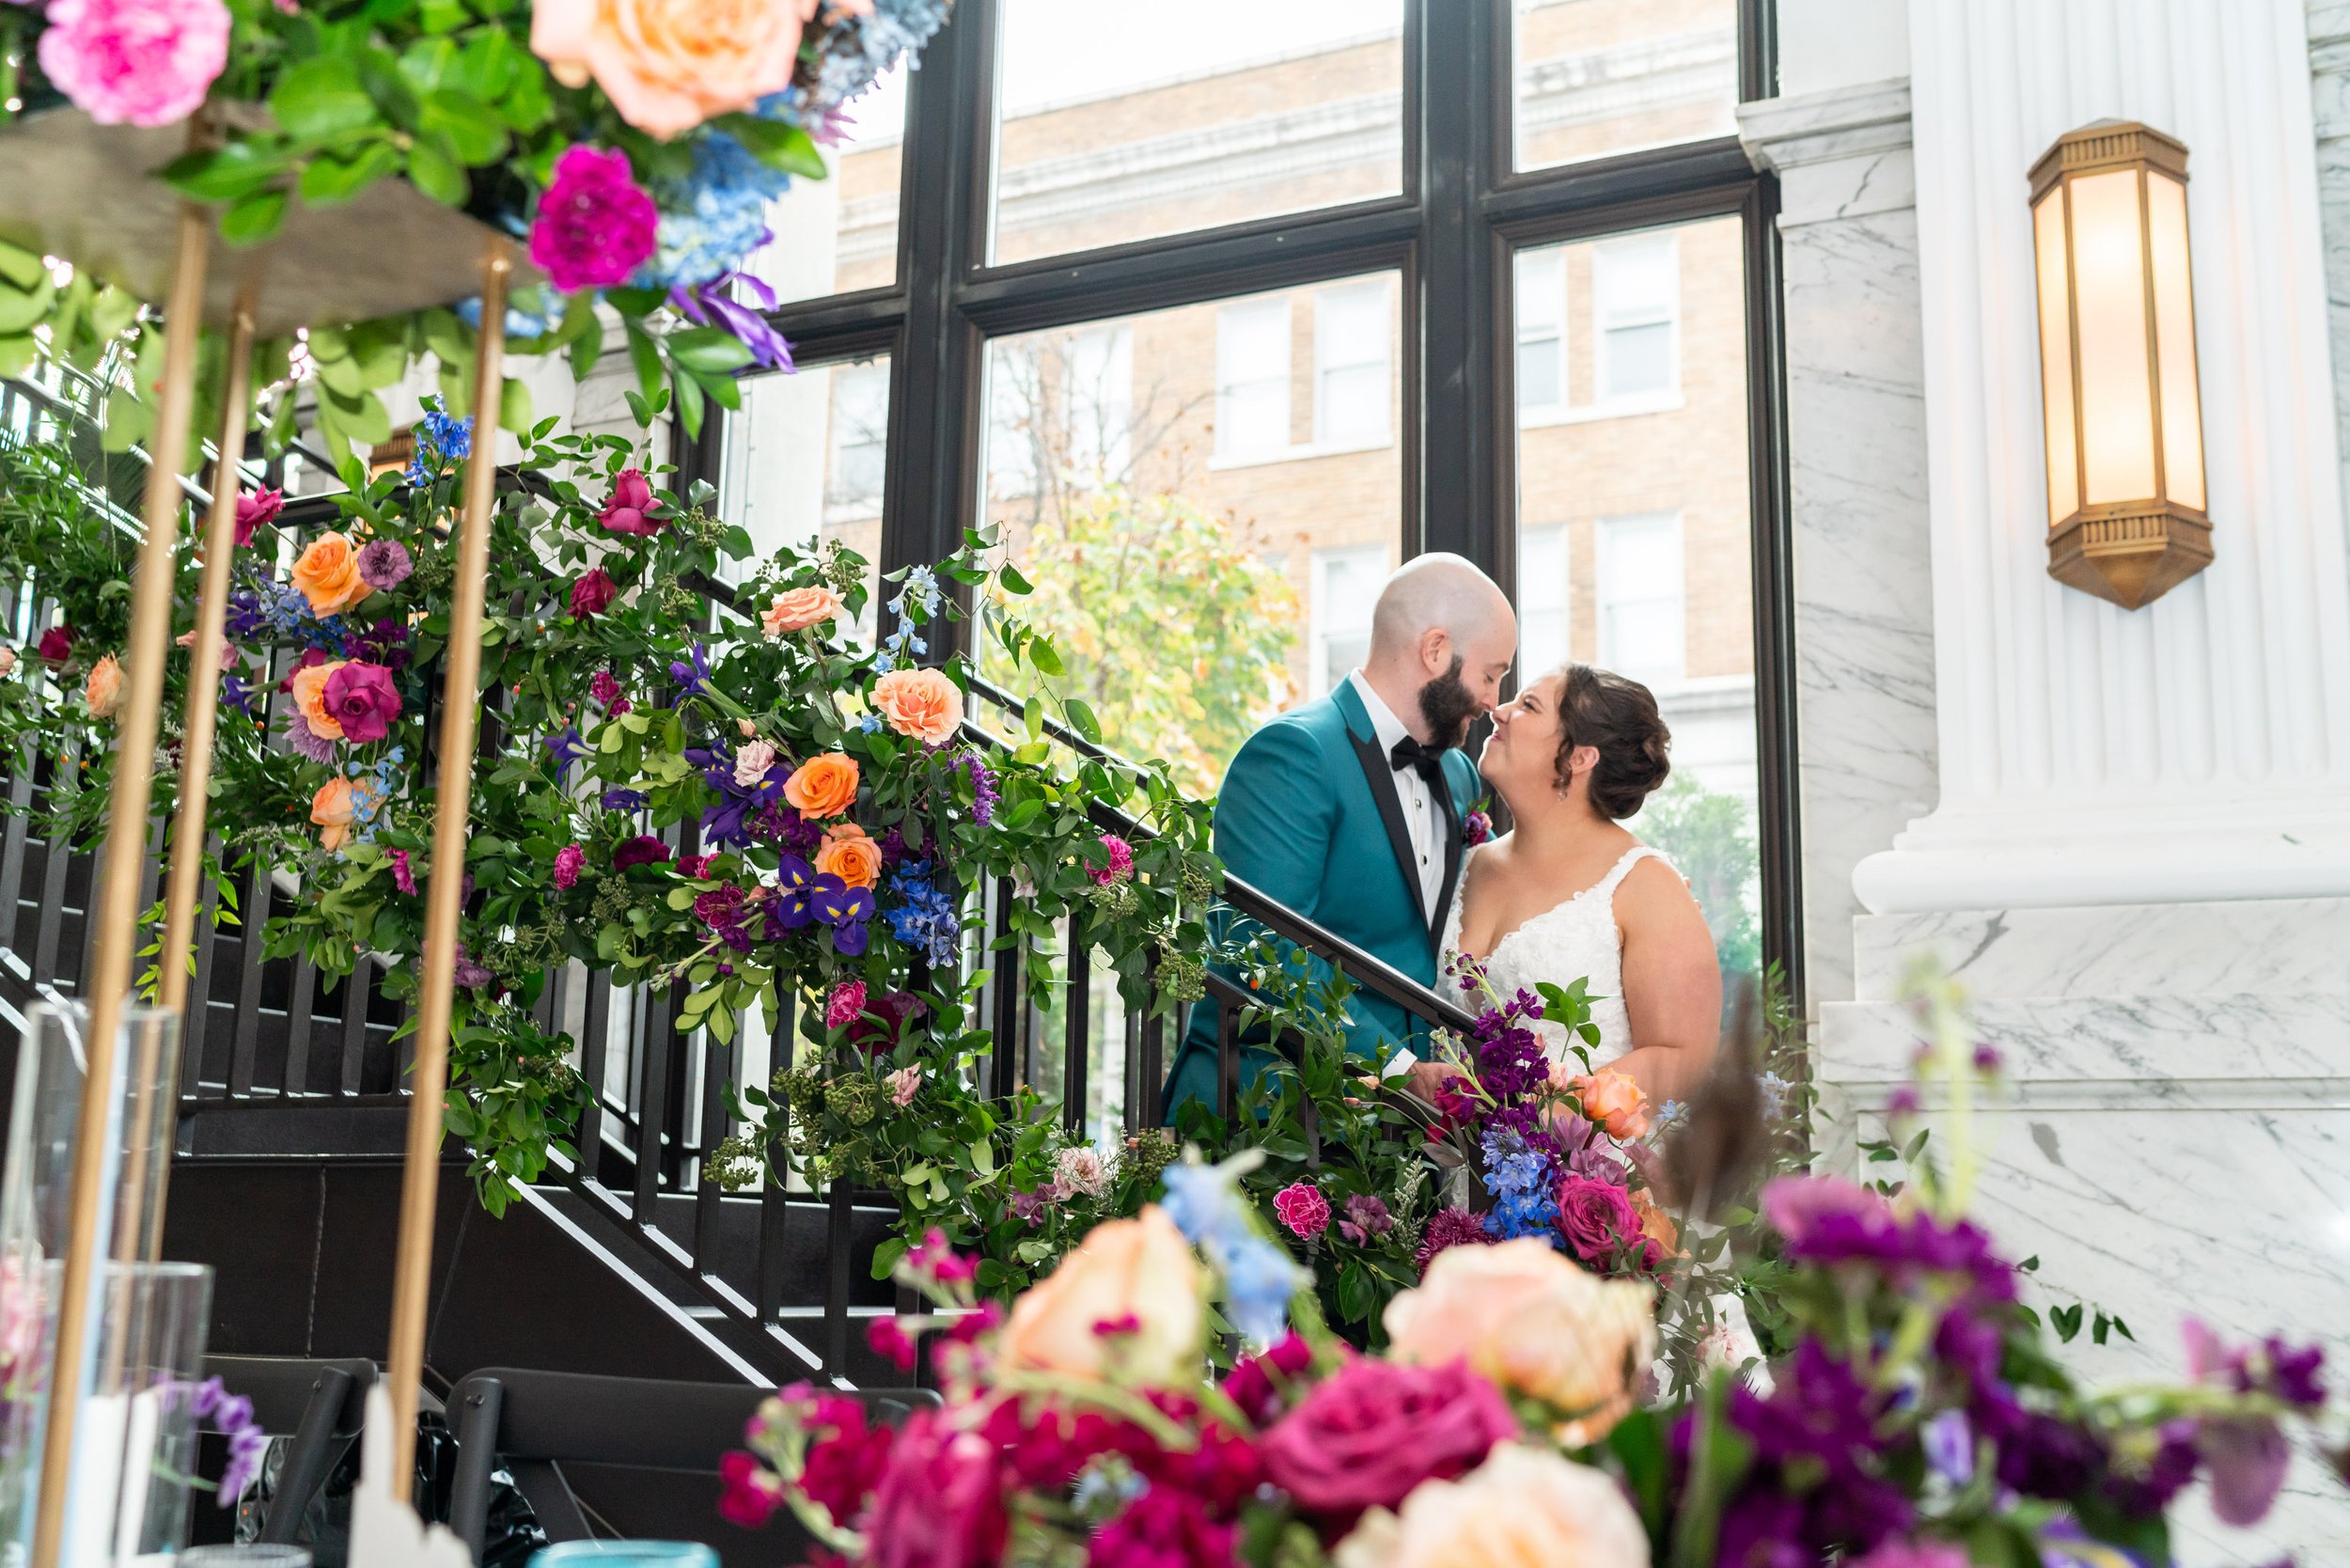 Floral staircase and wedding reception at citizens ballroom bank